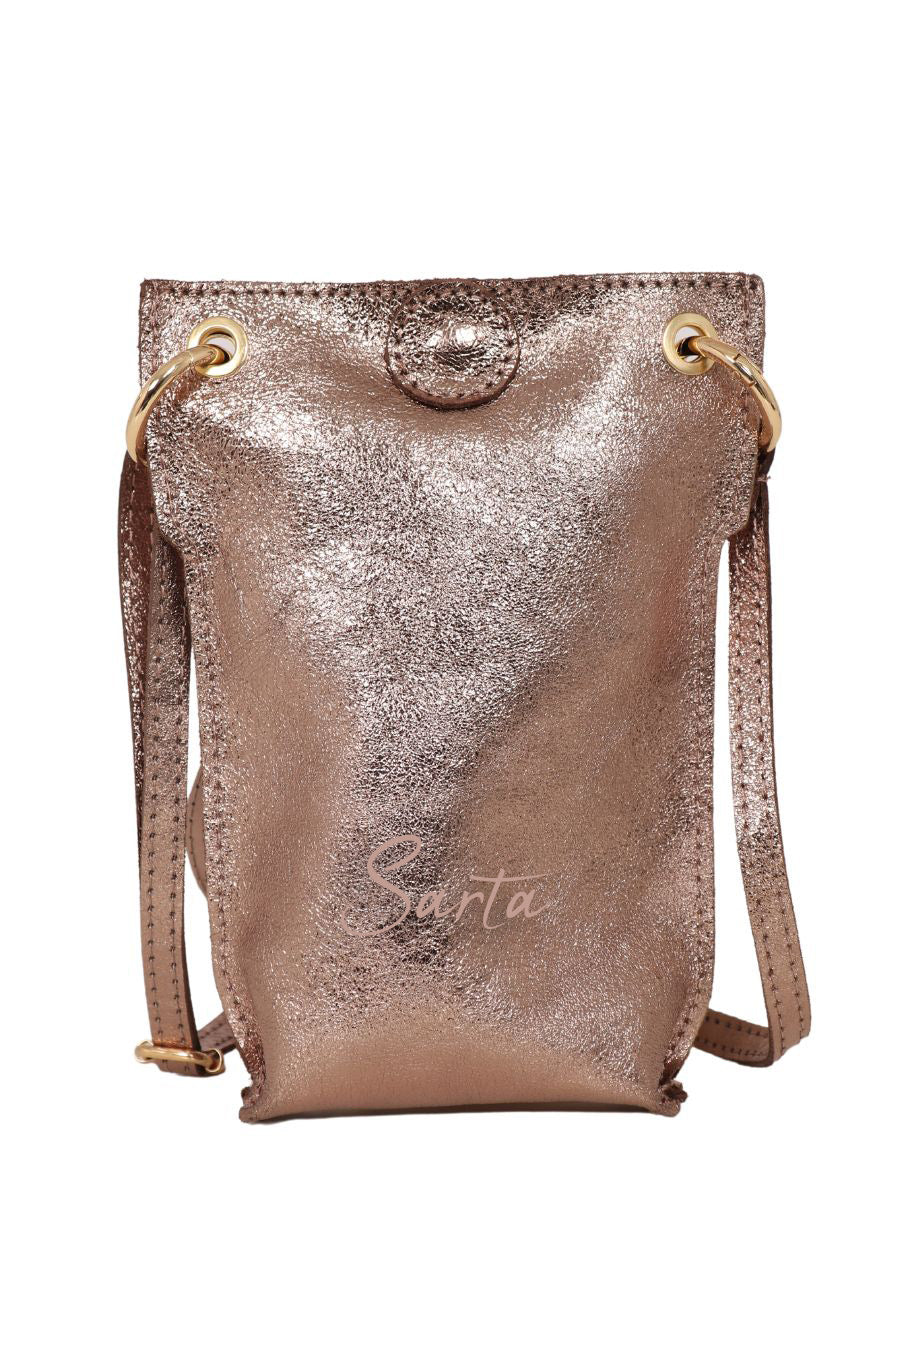 Champagne Genuine Italian Leather Crossbody Phone Pouch